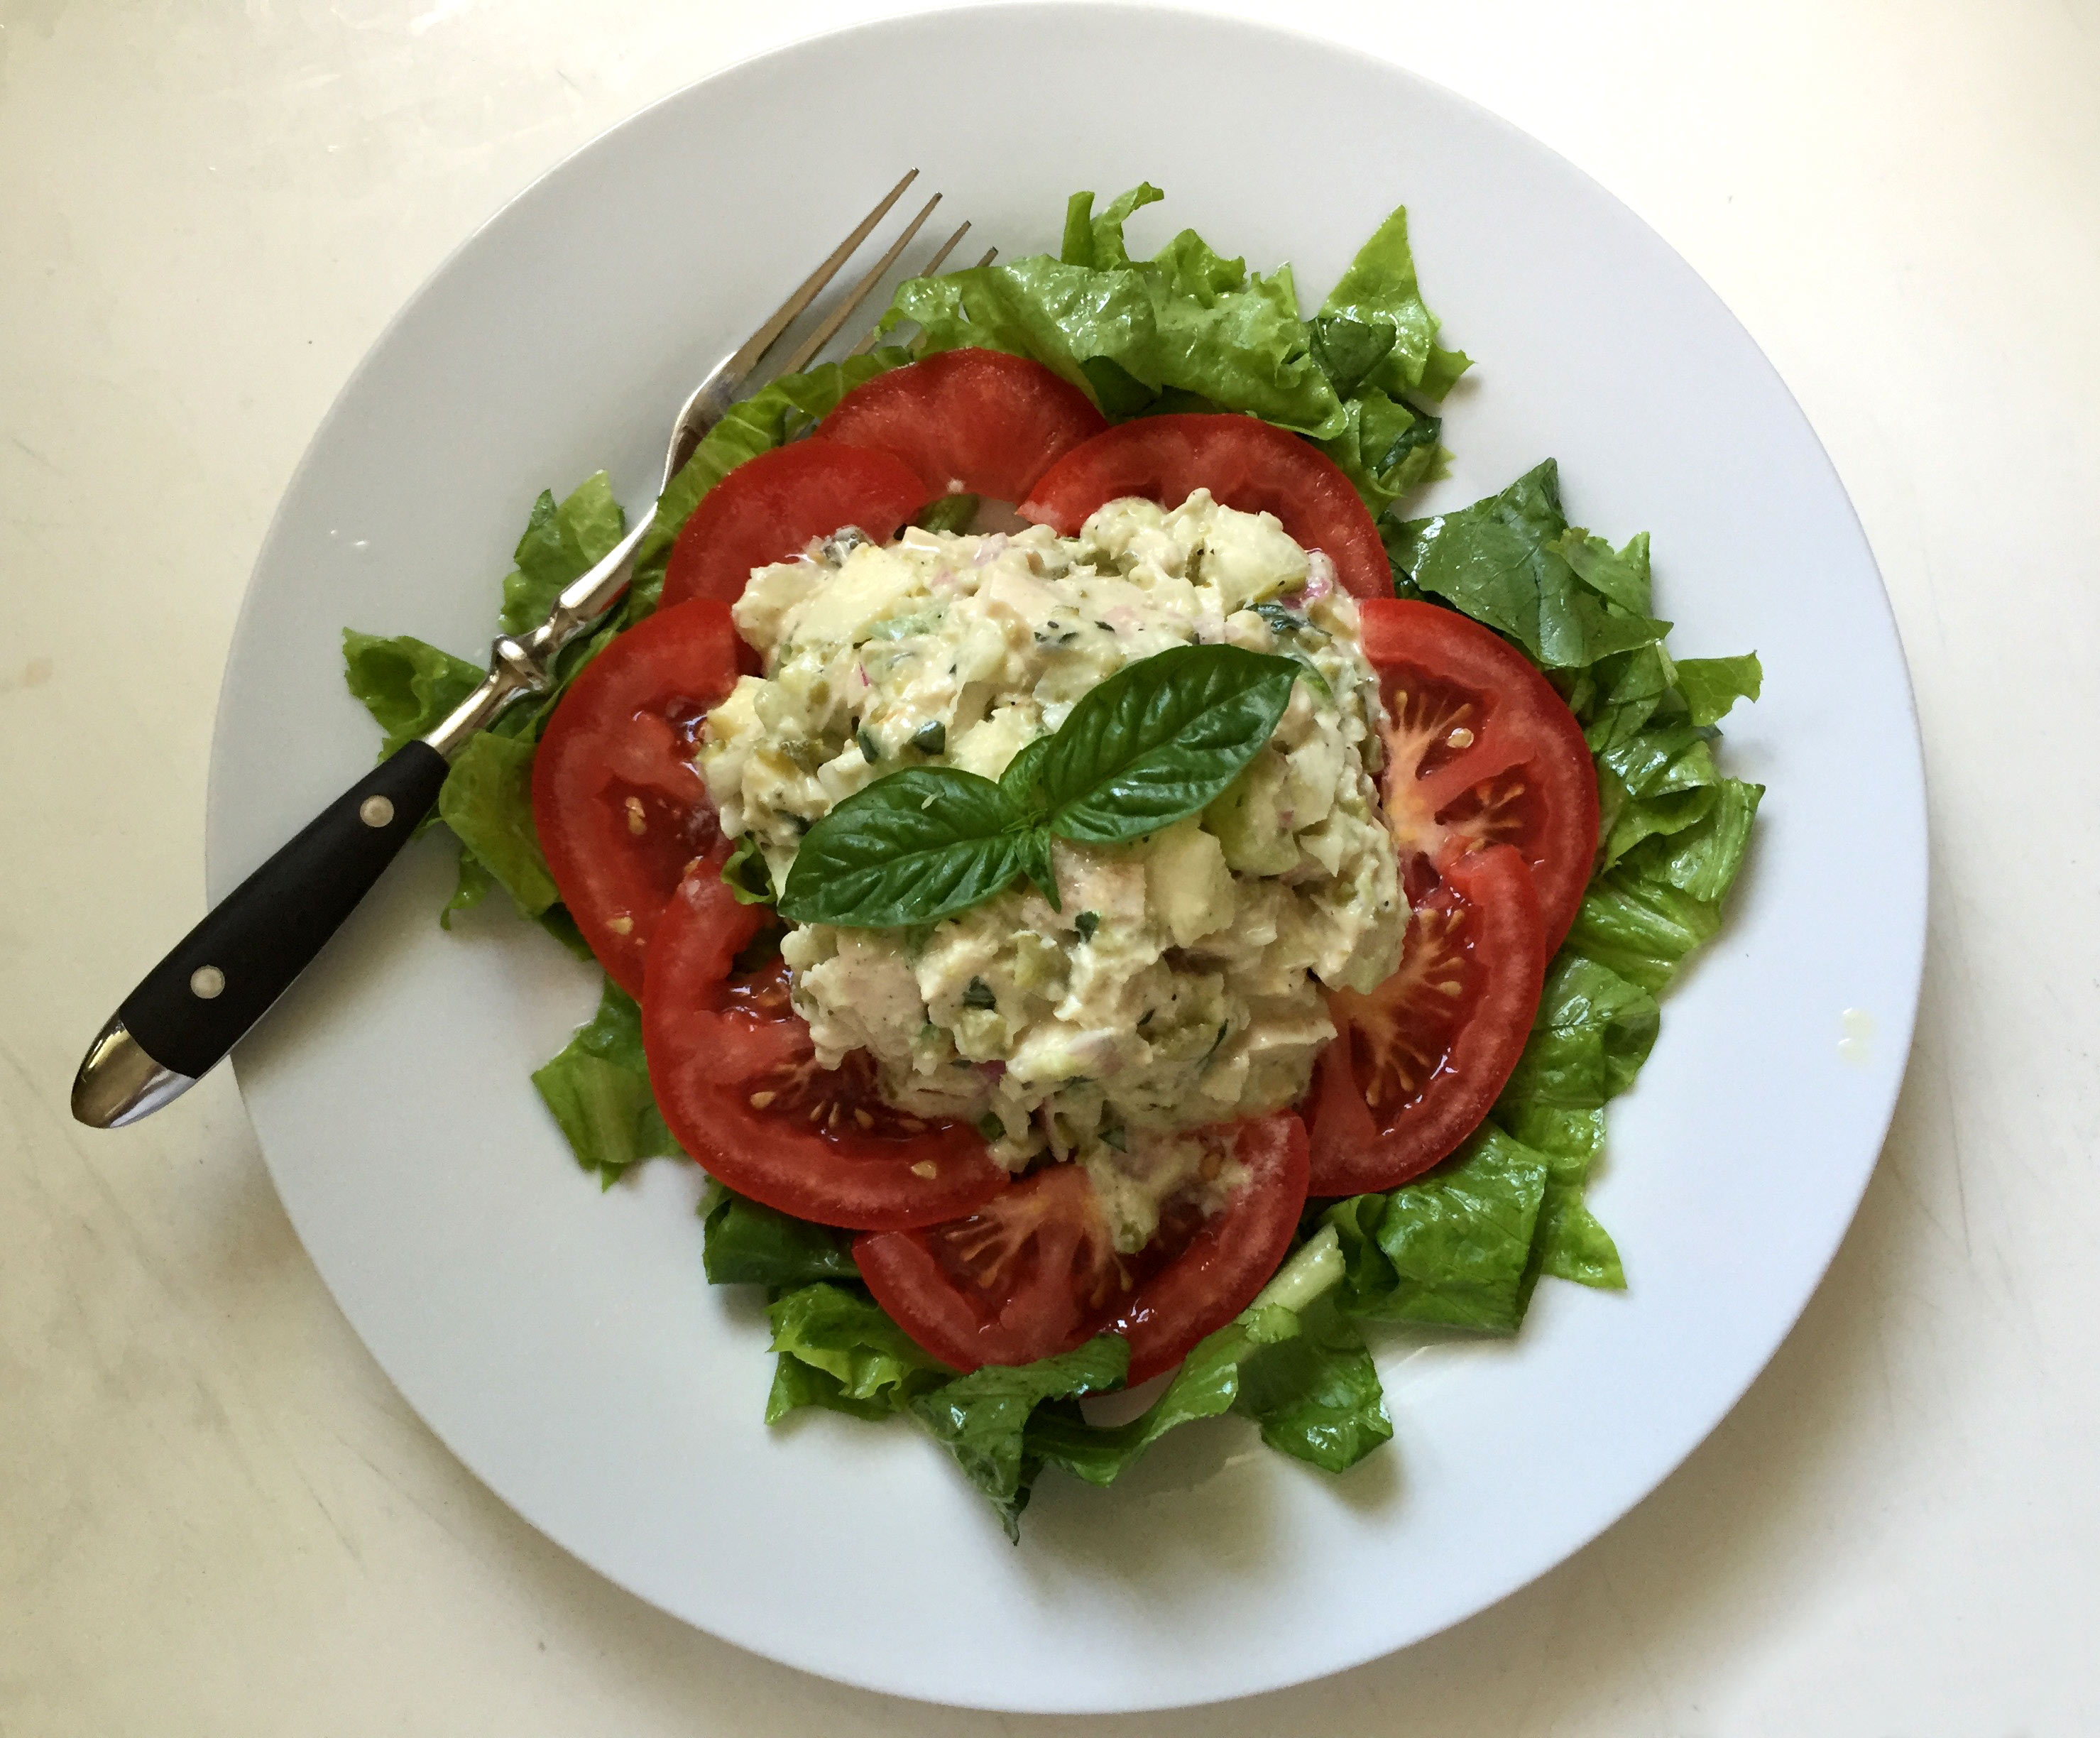 Old-Fashioned Chickpea Salad over Heirloom Tomatoes